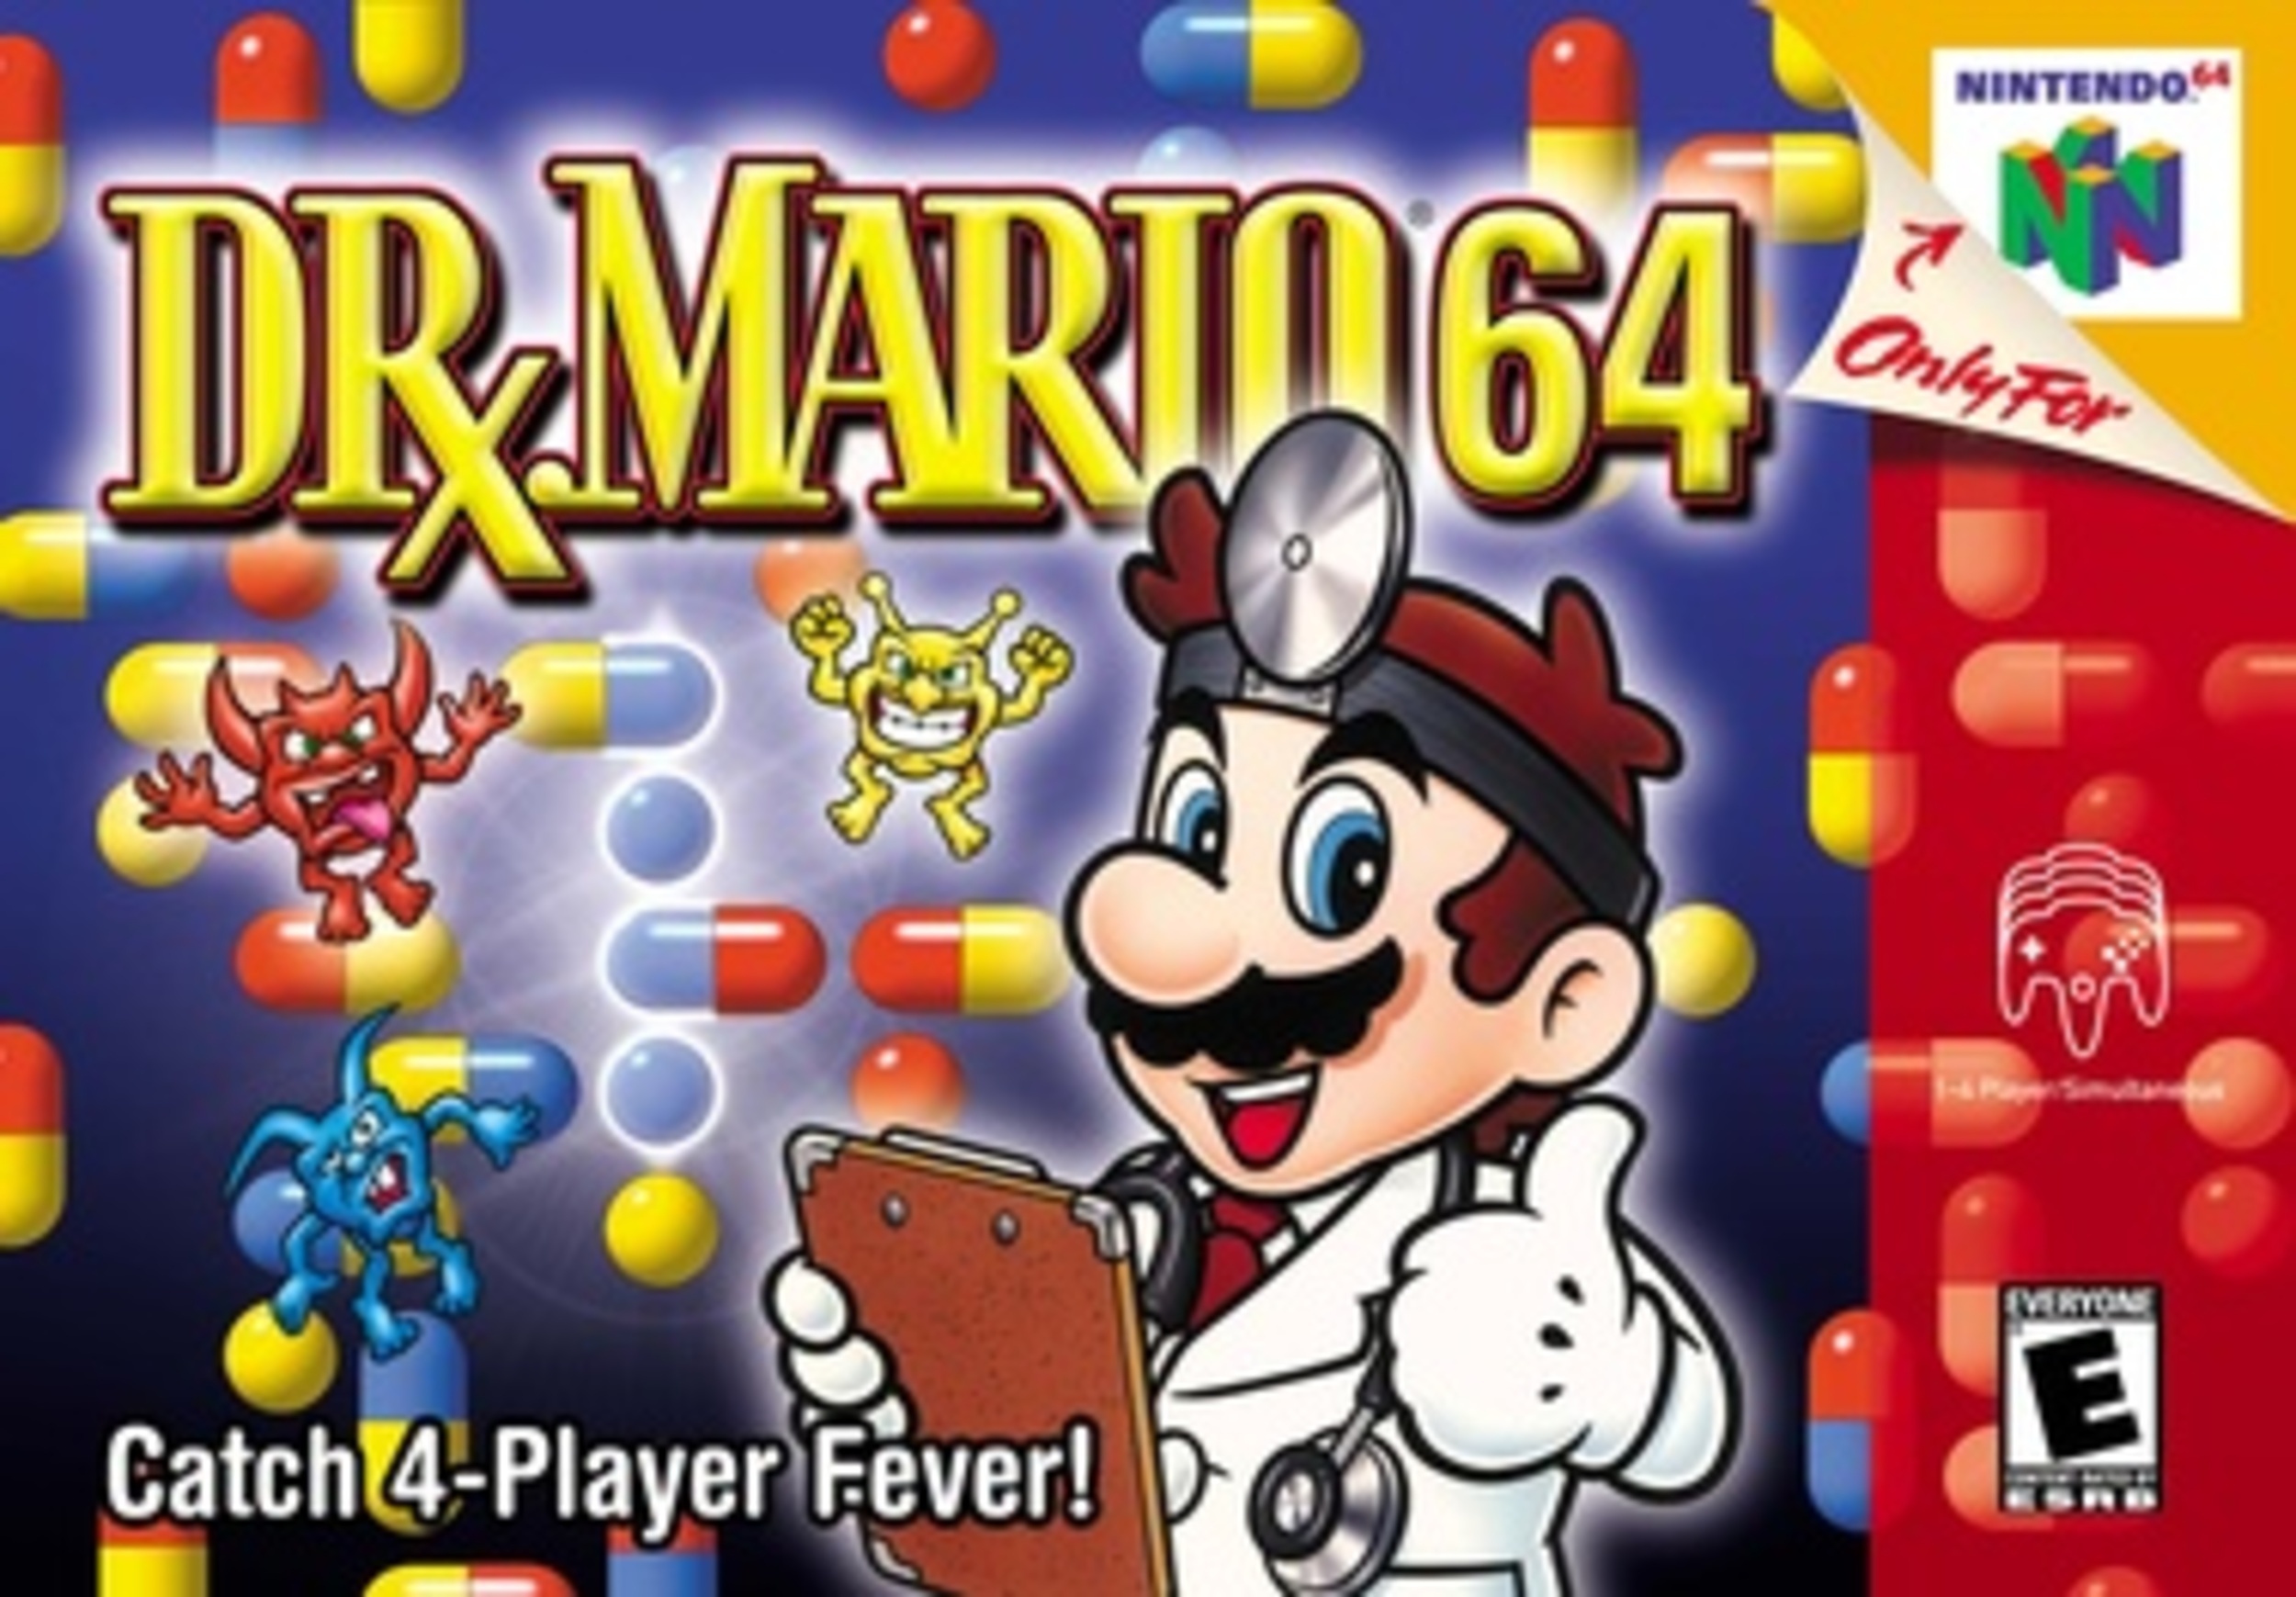 <p>The first <em>Dr. Mario</em> on the NES gave Mario a whole new dimension to play in with a challenging, color-matching puzzle game. It introduced players to new game genres through their favorite characters. However, the one Nintendo made for the Nintendo 64 stopped the good doctor in its tracks. </p><p>This version of <em>Dr. Mario</em> does offer more modes for single and multiplayer matches and even a story, but they all feel like the original game. The only addition is a slightly higher level of graphics and sound effects. It's the video game equivalent of Cedric the Entertainment's film remake of TV's <em>The Honeymooners</em>. When you're experiencing it, you wonder, "Do we really need this?"</p><p><a href='https://www.msn.com/en-us/community/channel/vid-cj9pqbr0vn9in2b6ddcd8sfgpfq6x6utp44fssrv6mc2gtybw0us'>Follow us on MSN to see more of our exclusive entertainment content.</a></p>